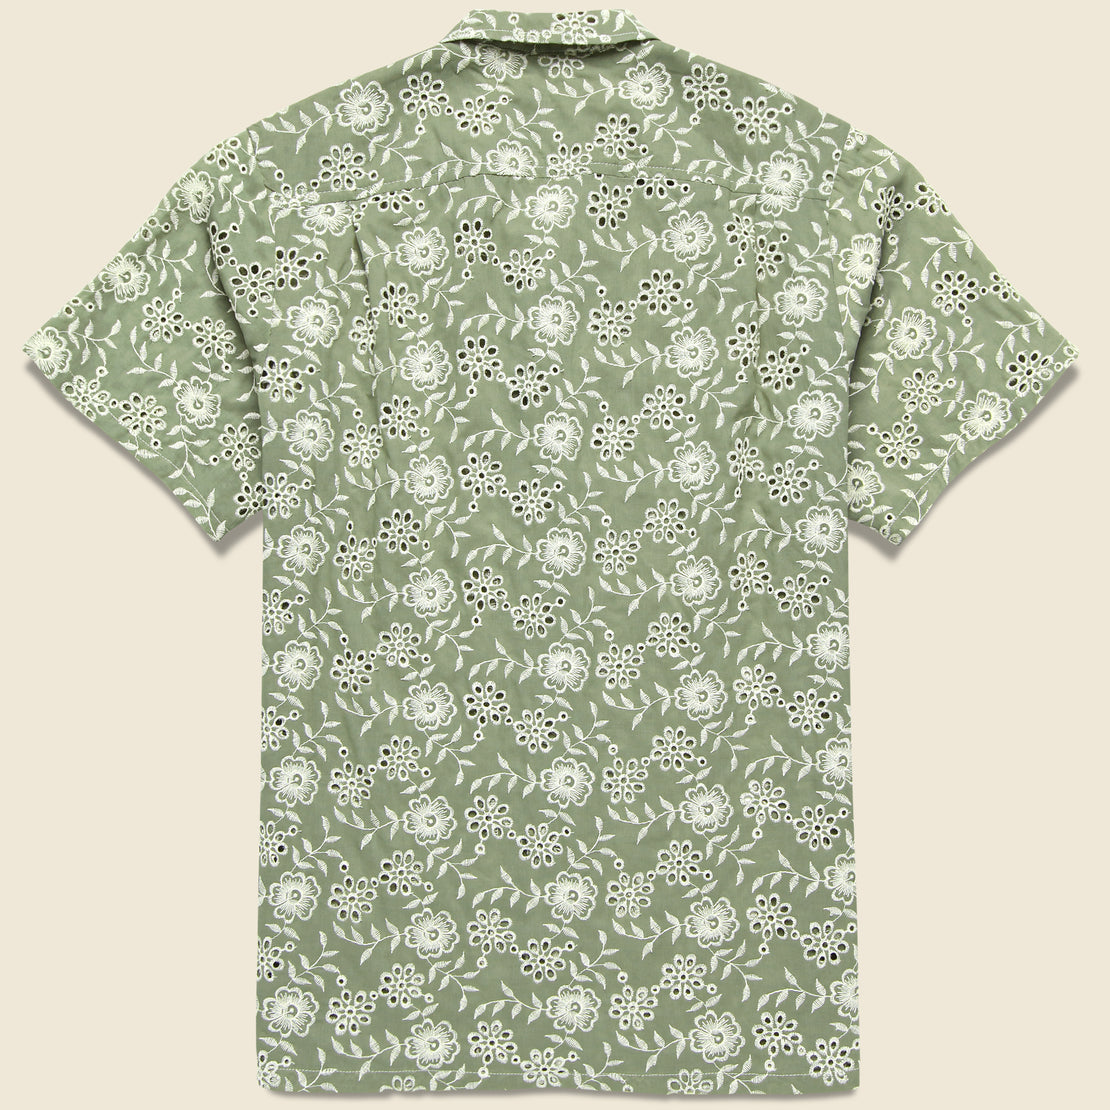 Anglaise Camp Shirt - Sage - Bather - STAG Provisions - Tops - S/S Woven - Floral